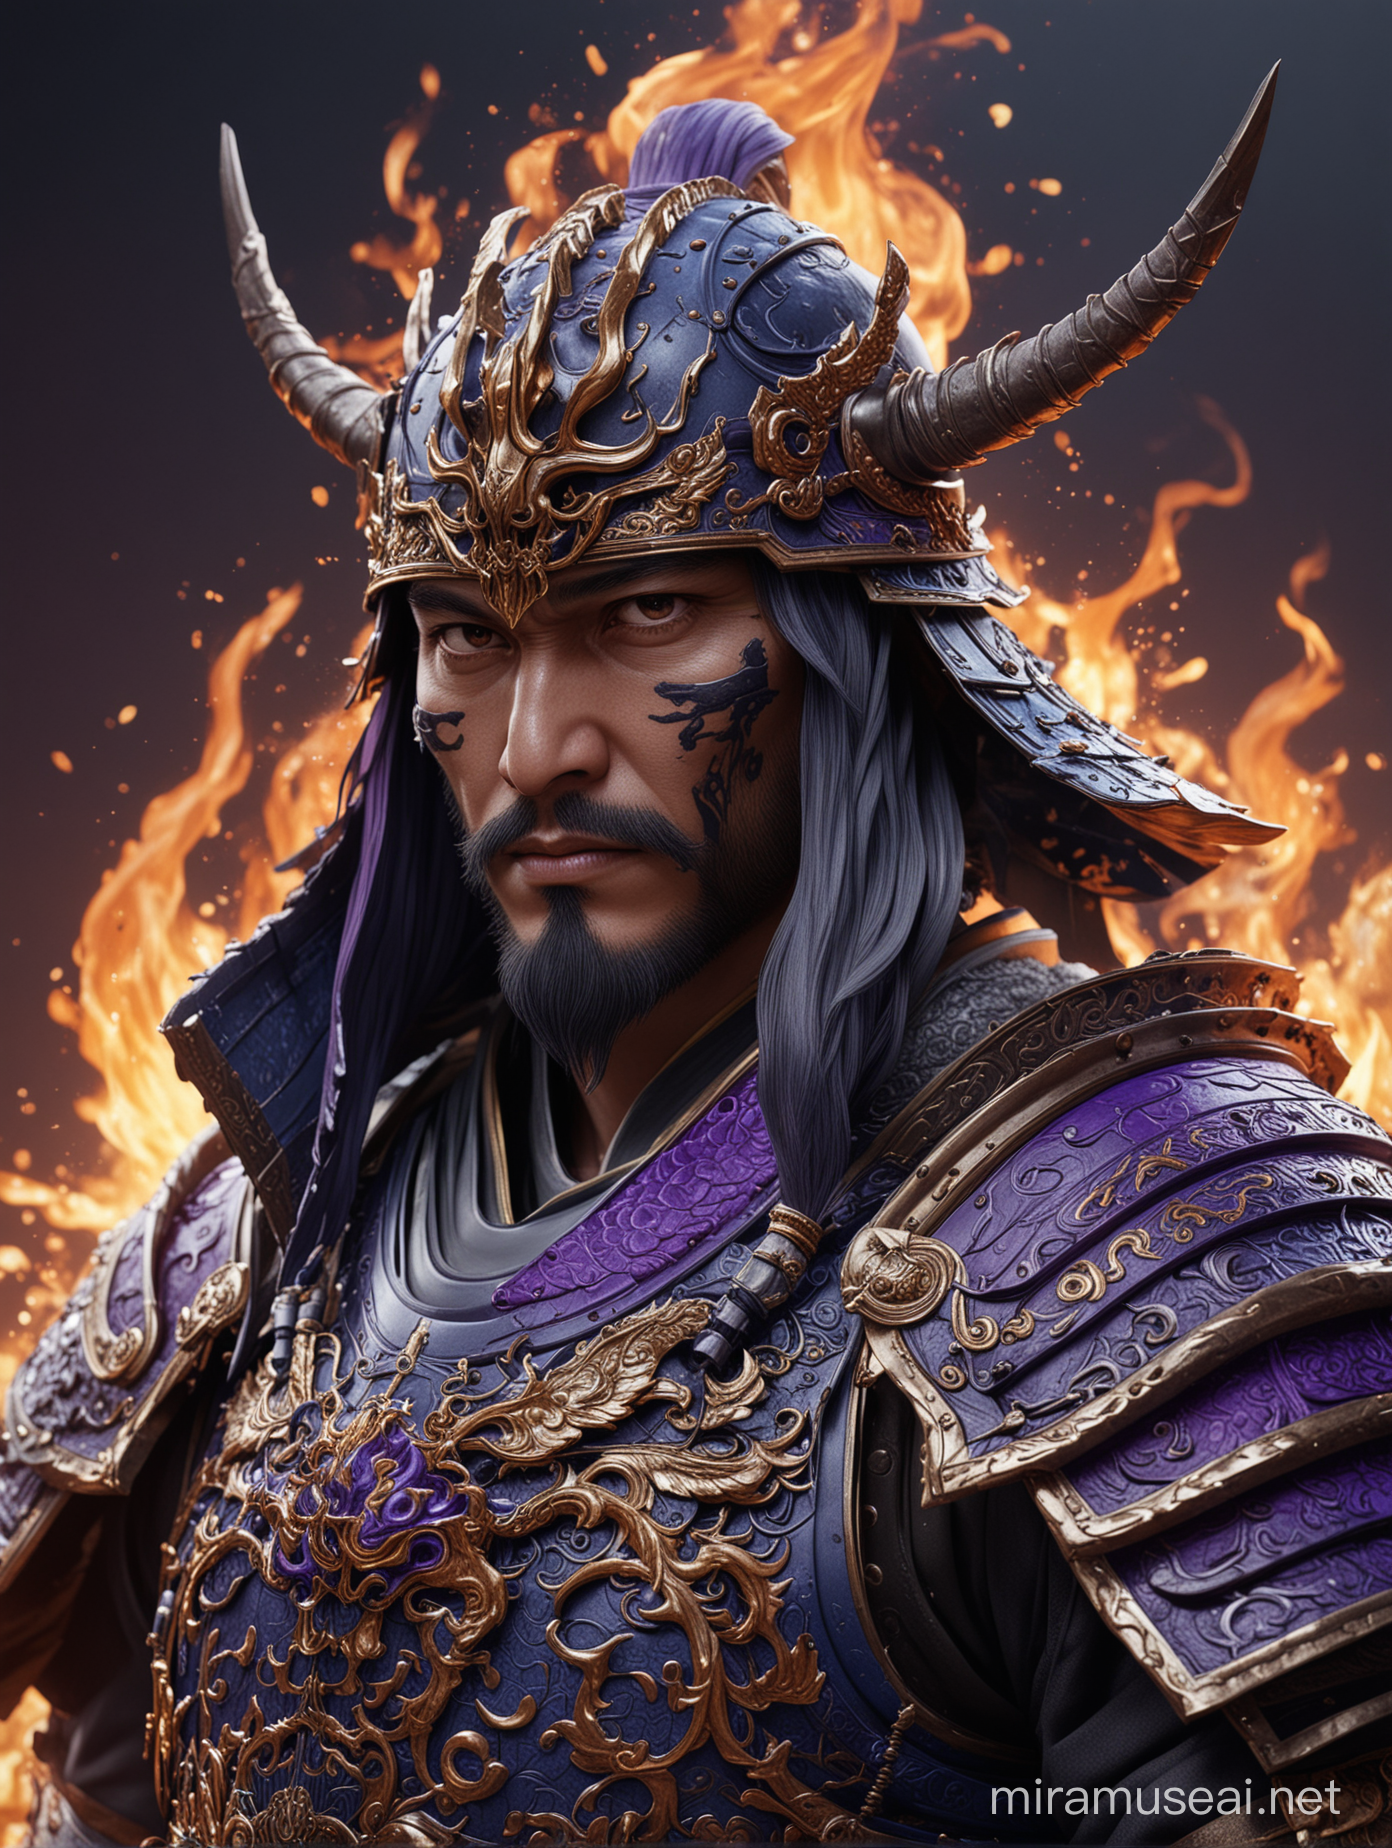 The drawing shows a samurai King with a flaming helmet and intricate Chinese armor. This is a complex, elegant digital illustration made in a picturesque, hyperrealistic and super detailed way. It is made in 8k resolution using royal purple and ultramarine blue colors. Dynamic. The illustrations are created using the unreal engine 5 and octane rendering, resulting in extremely clear lines with ultra-fine details. The picture also shows the depth of field at a distance. The work was done in collaboration with Artgerm, WRAP and Greg Rutkowski.